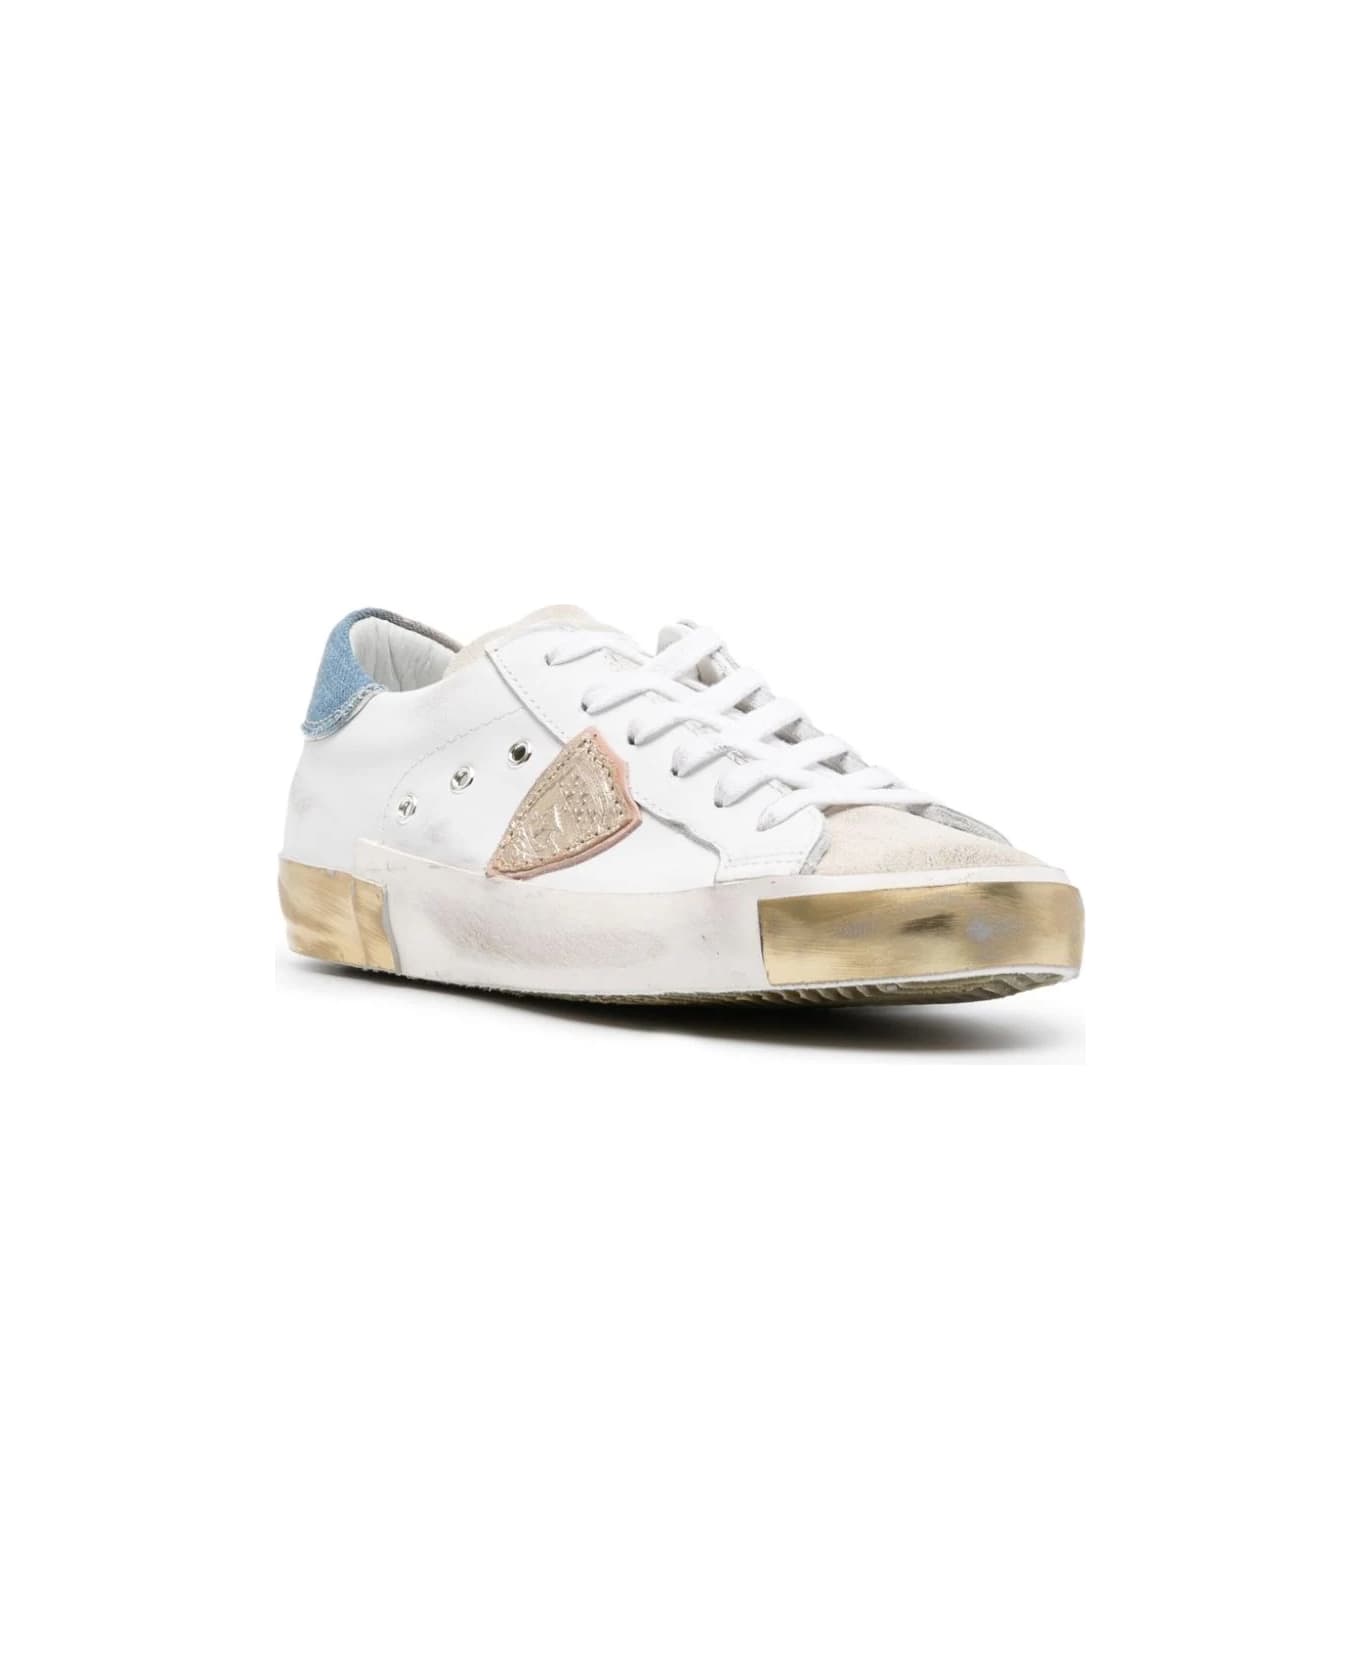 Philippe Model Prsx Low Sneakers - White And Light Blue